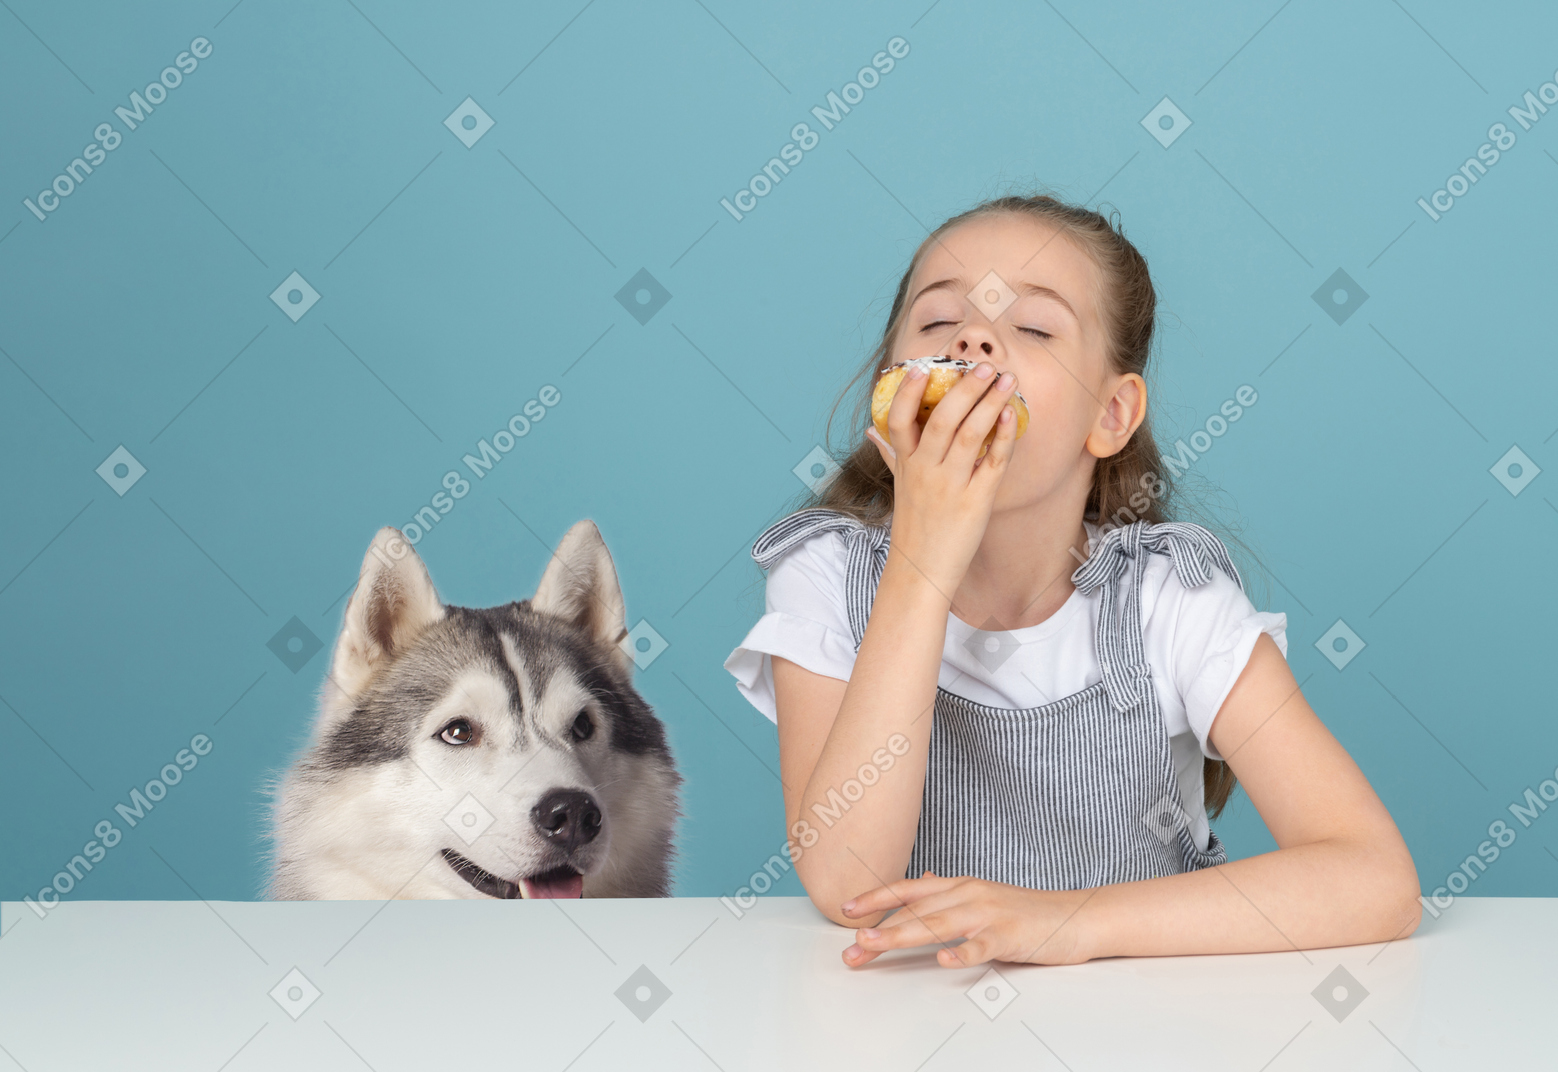 Cute little girl eating a doughnut and a husky dog looking at her